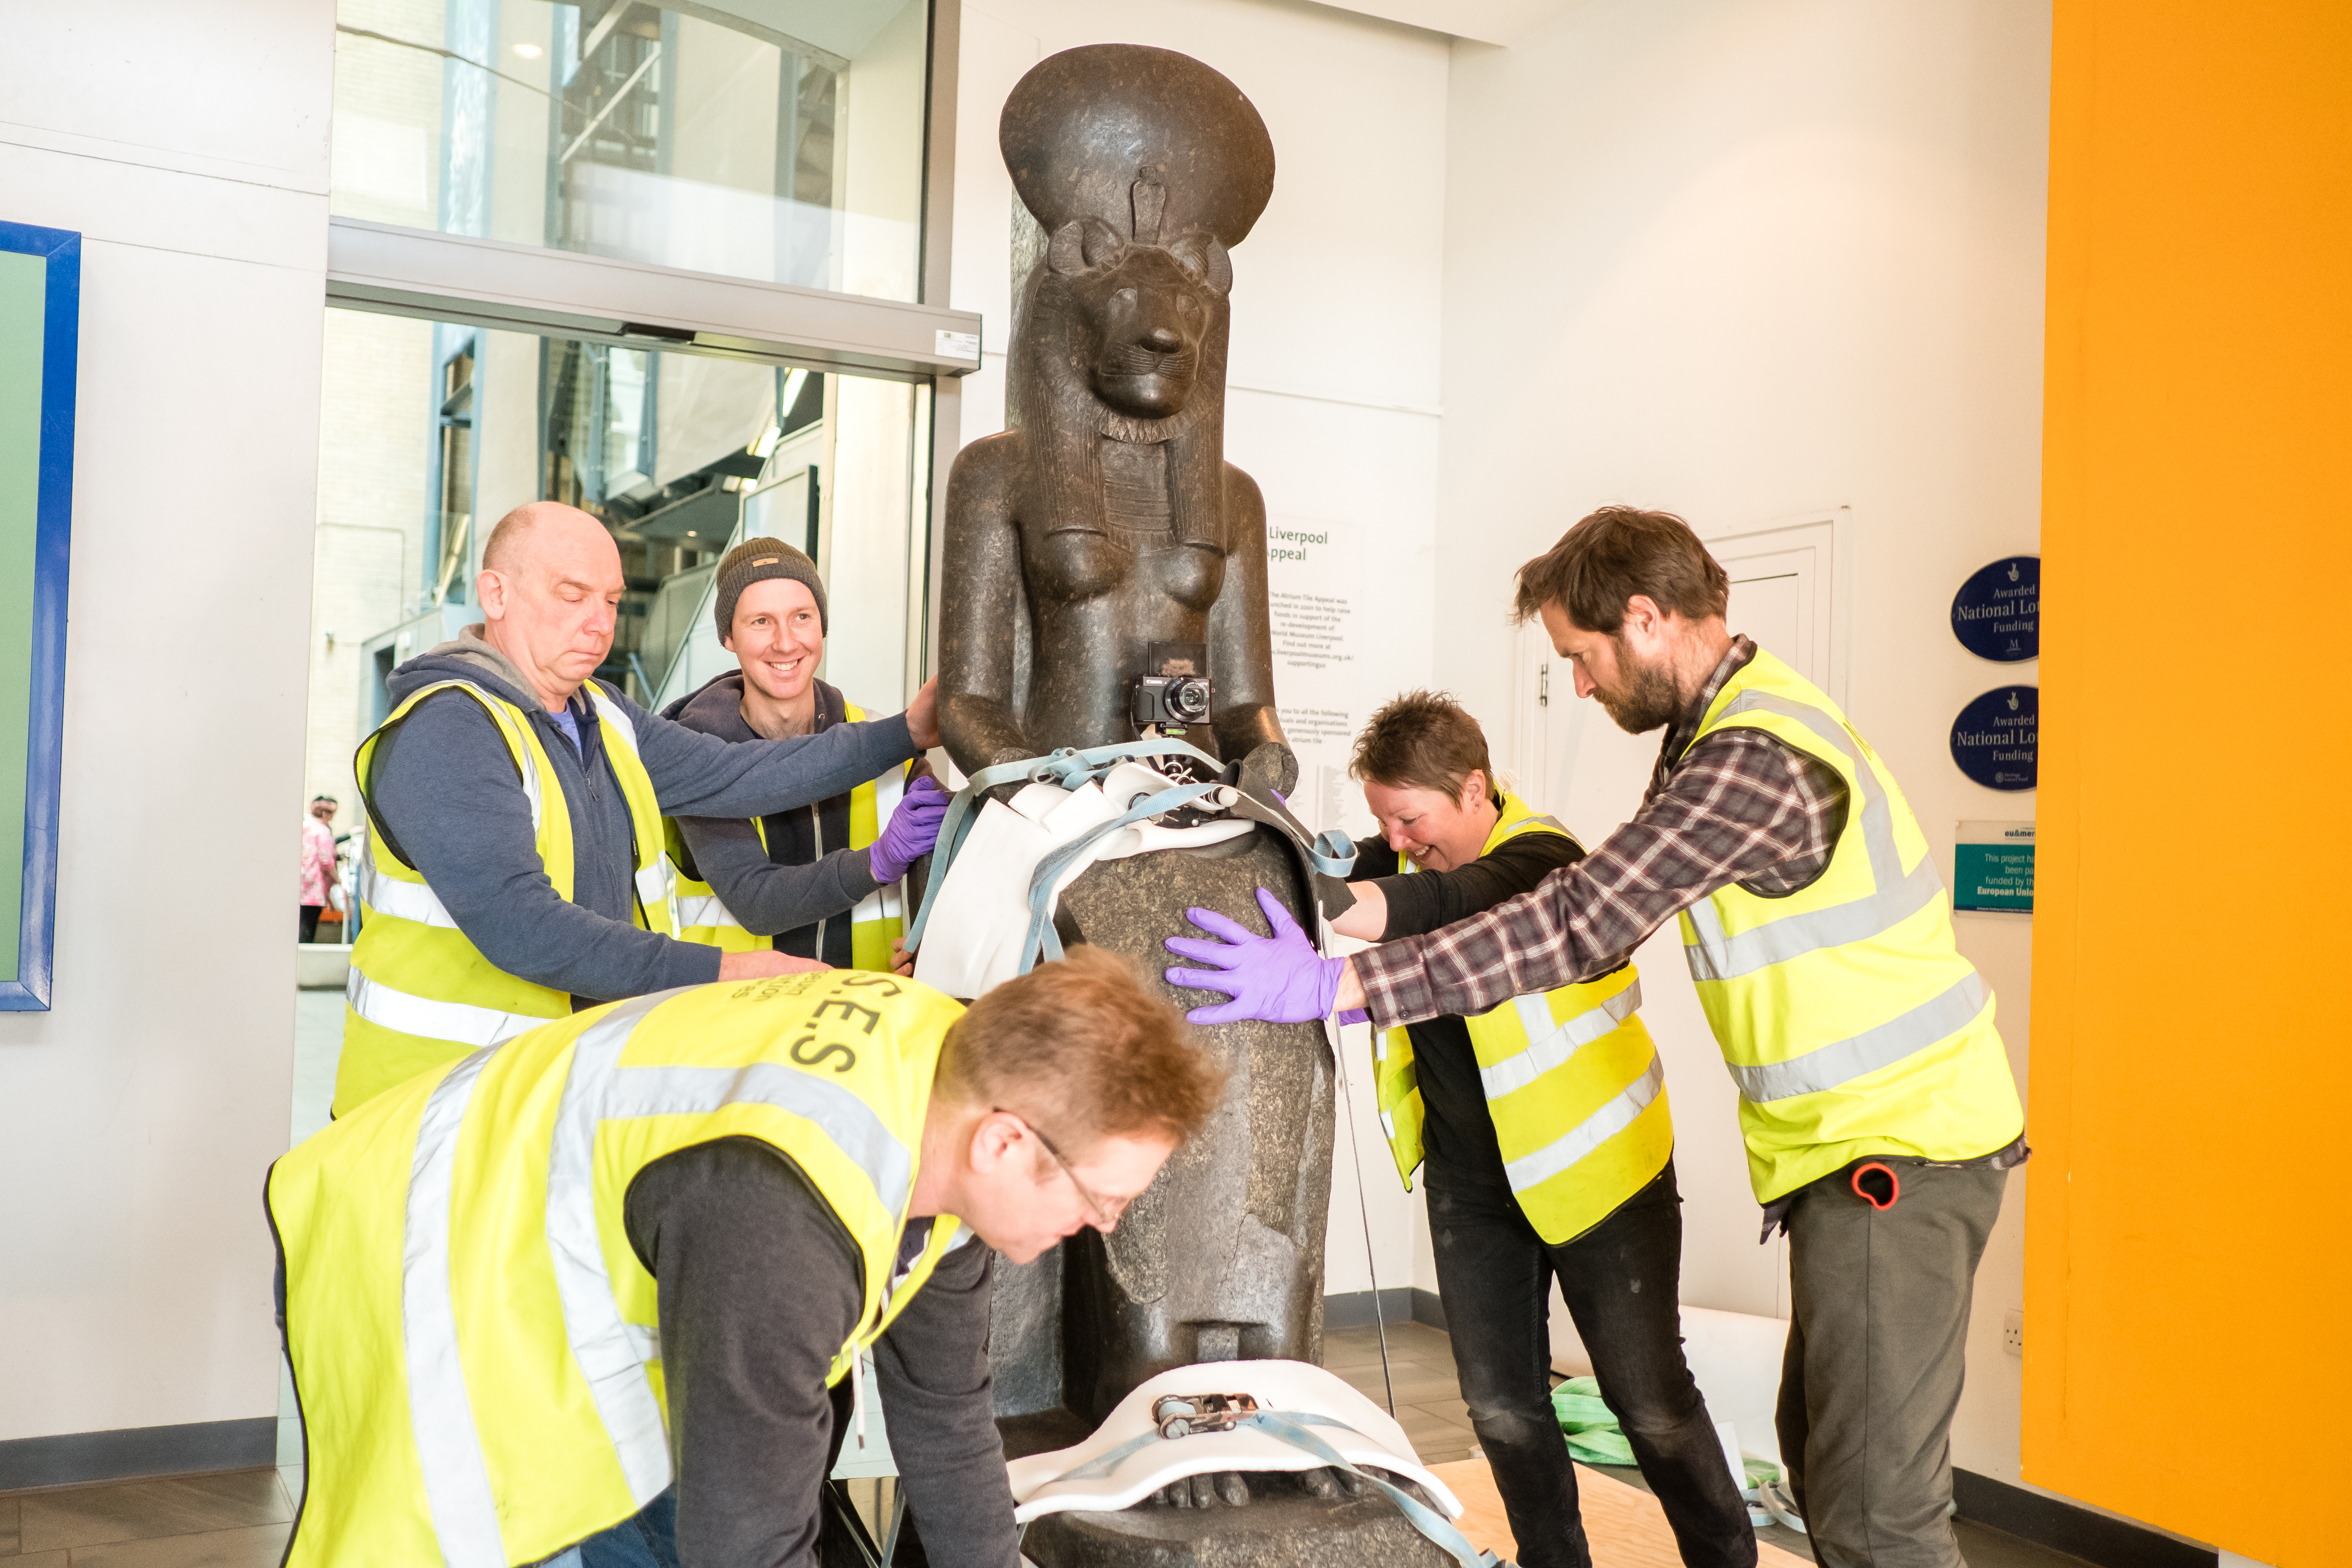 Our handling team getting ready to move the Sekhmet statue.